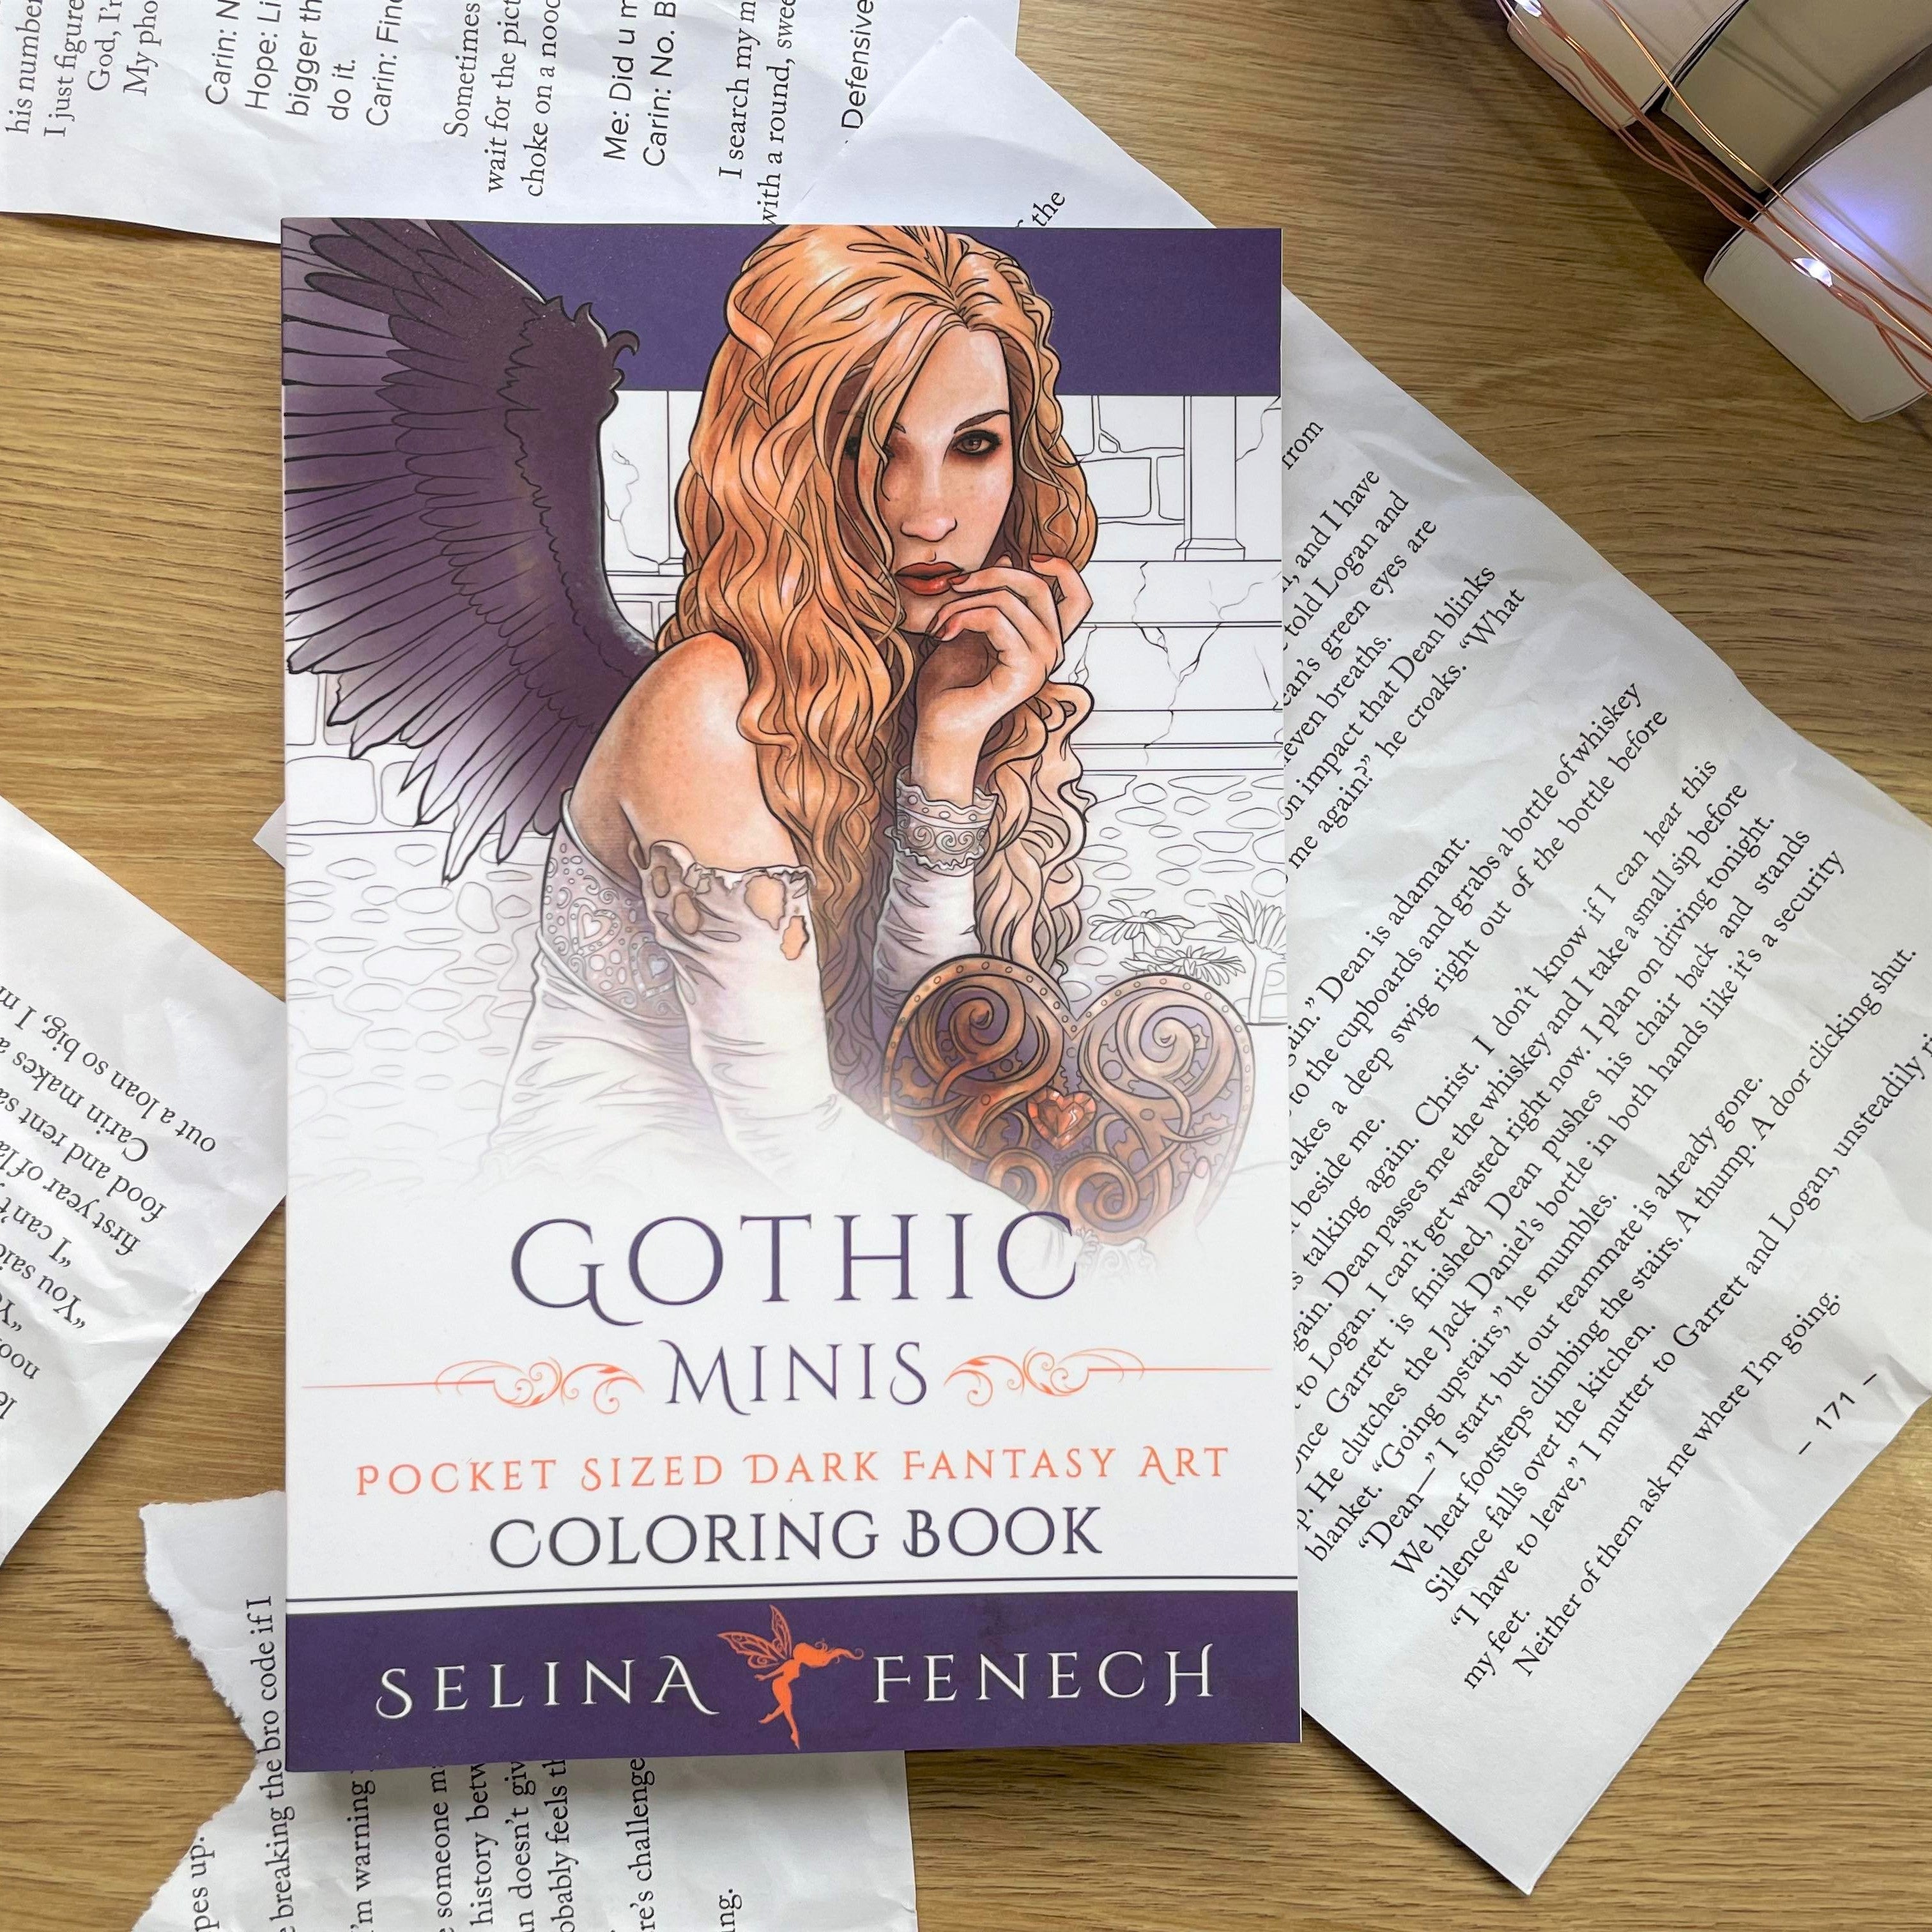 Gothic Minis - Pocket Sized Dark Fantasy Colouring Book by Selina Fenech